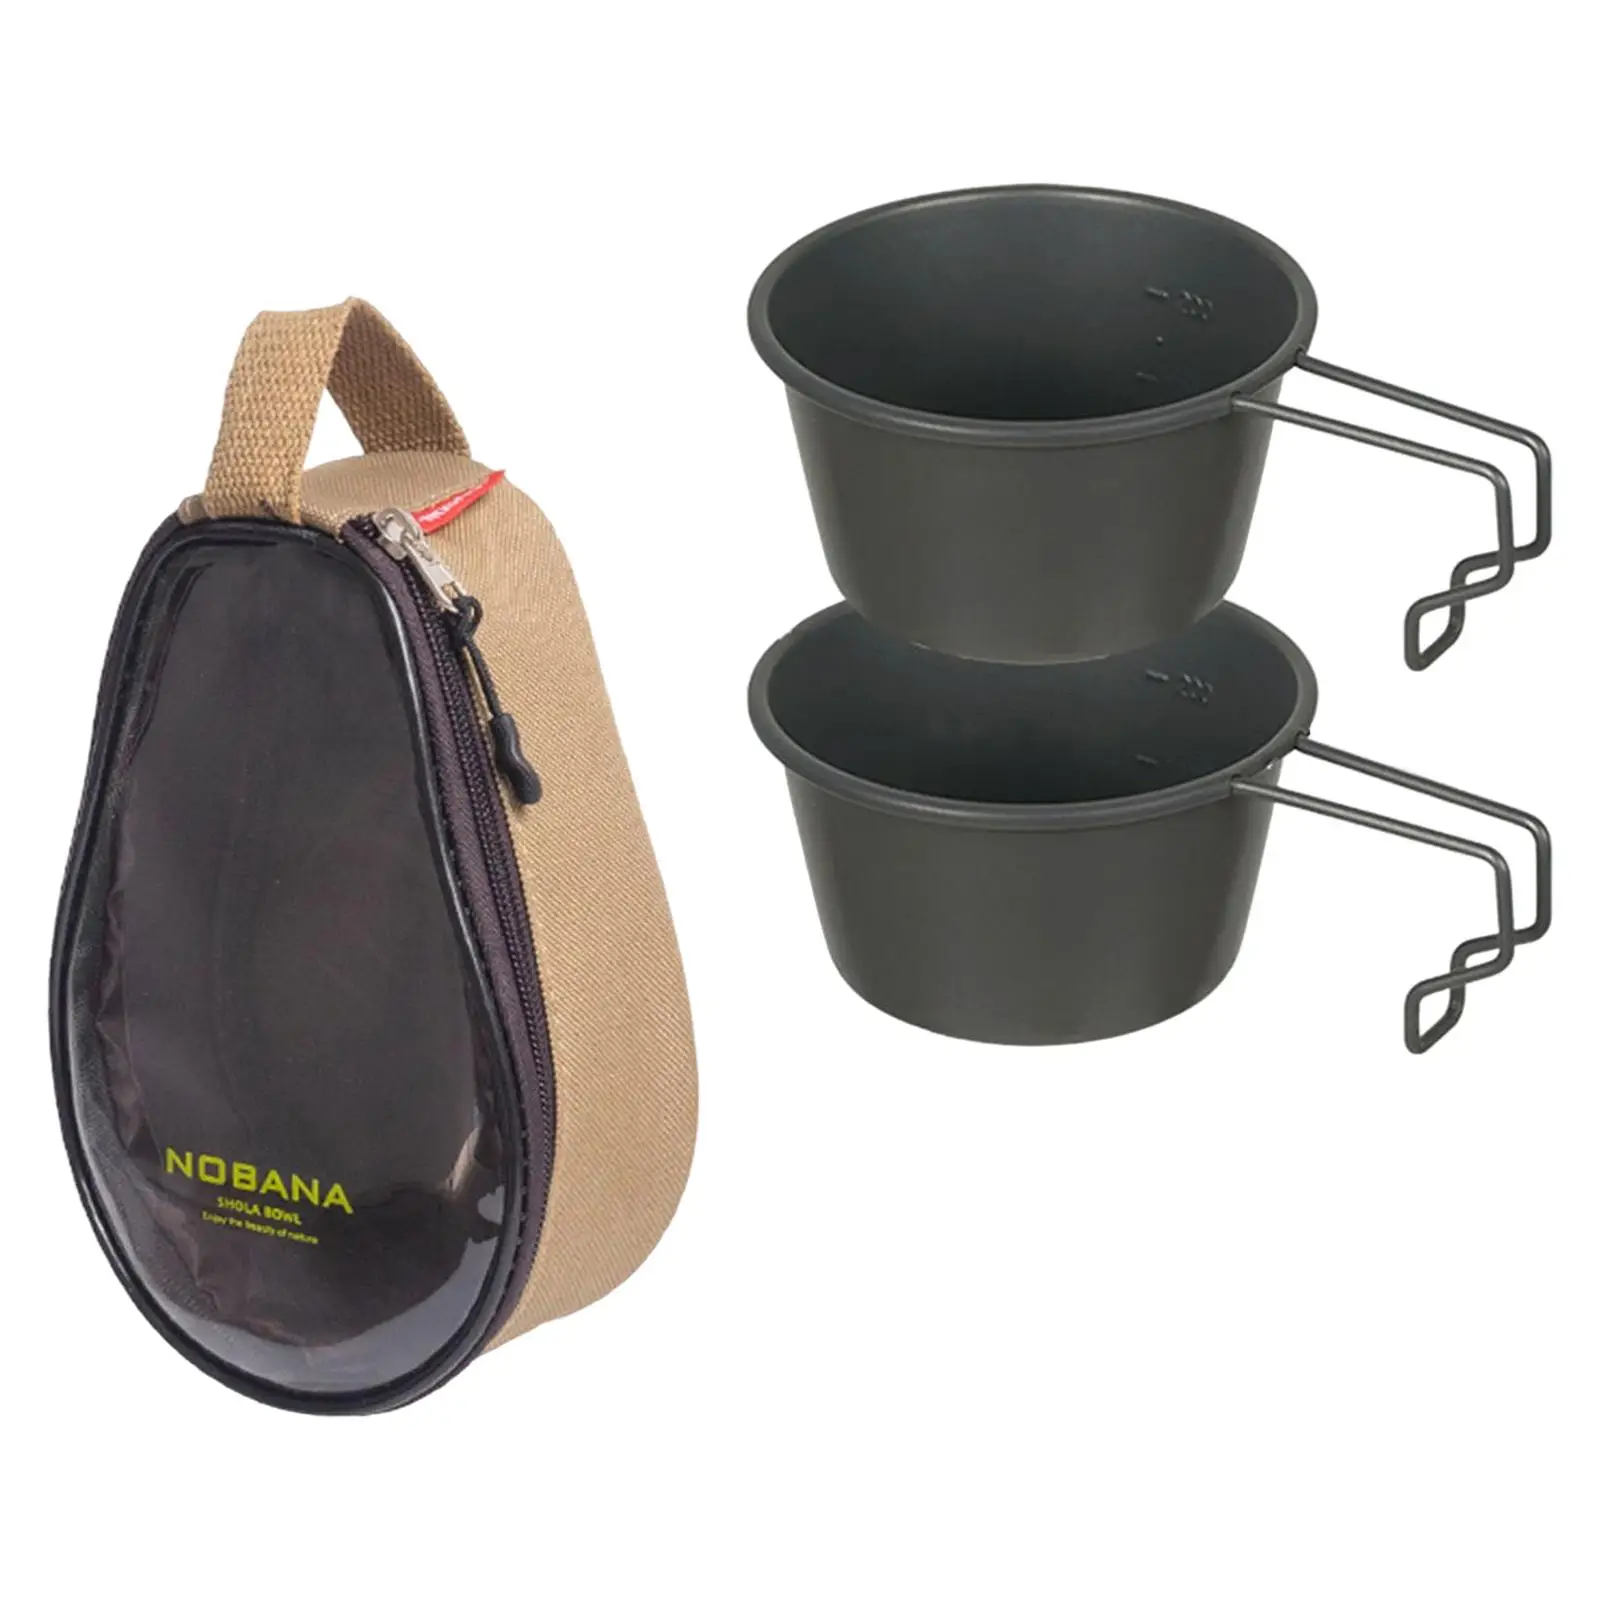 3 PCS stainless steel mugs with storage bag, portable picnic tableware in the